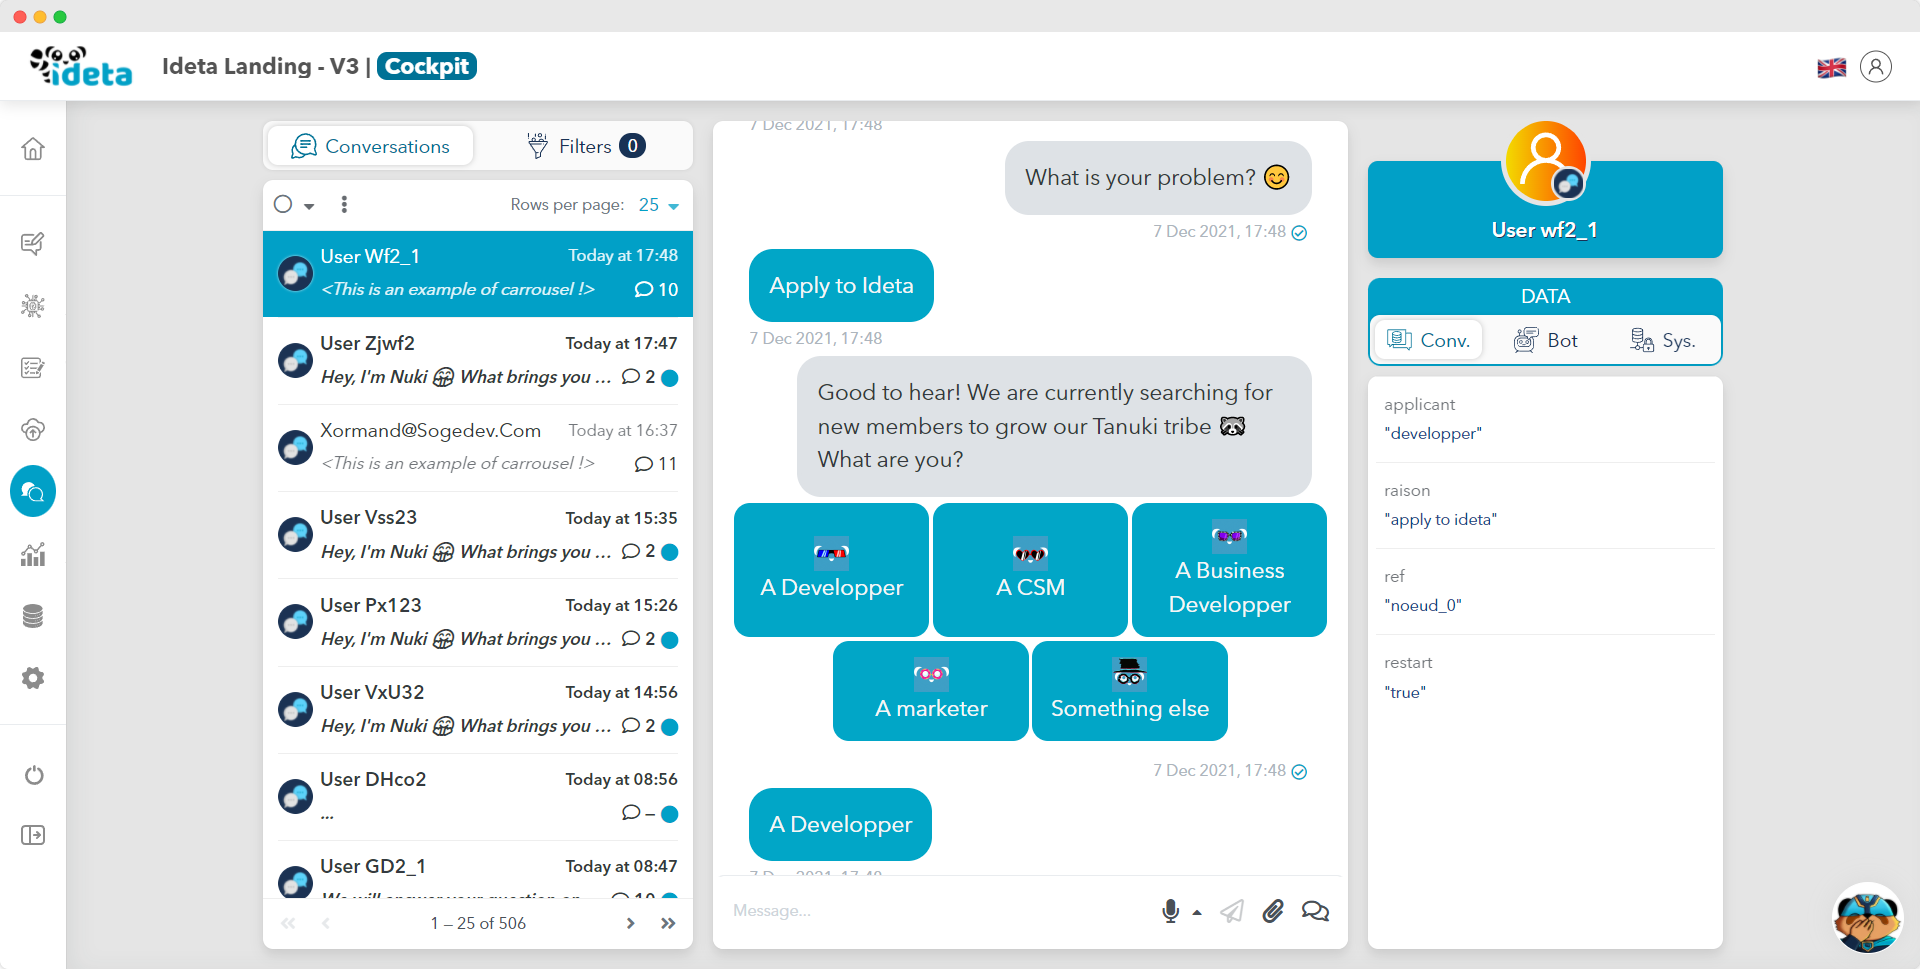 Ideta Software - This is the cockpit, you can have an overview of all conversations and respond to your users live.